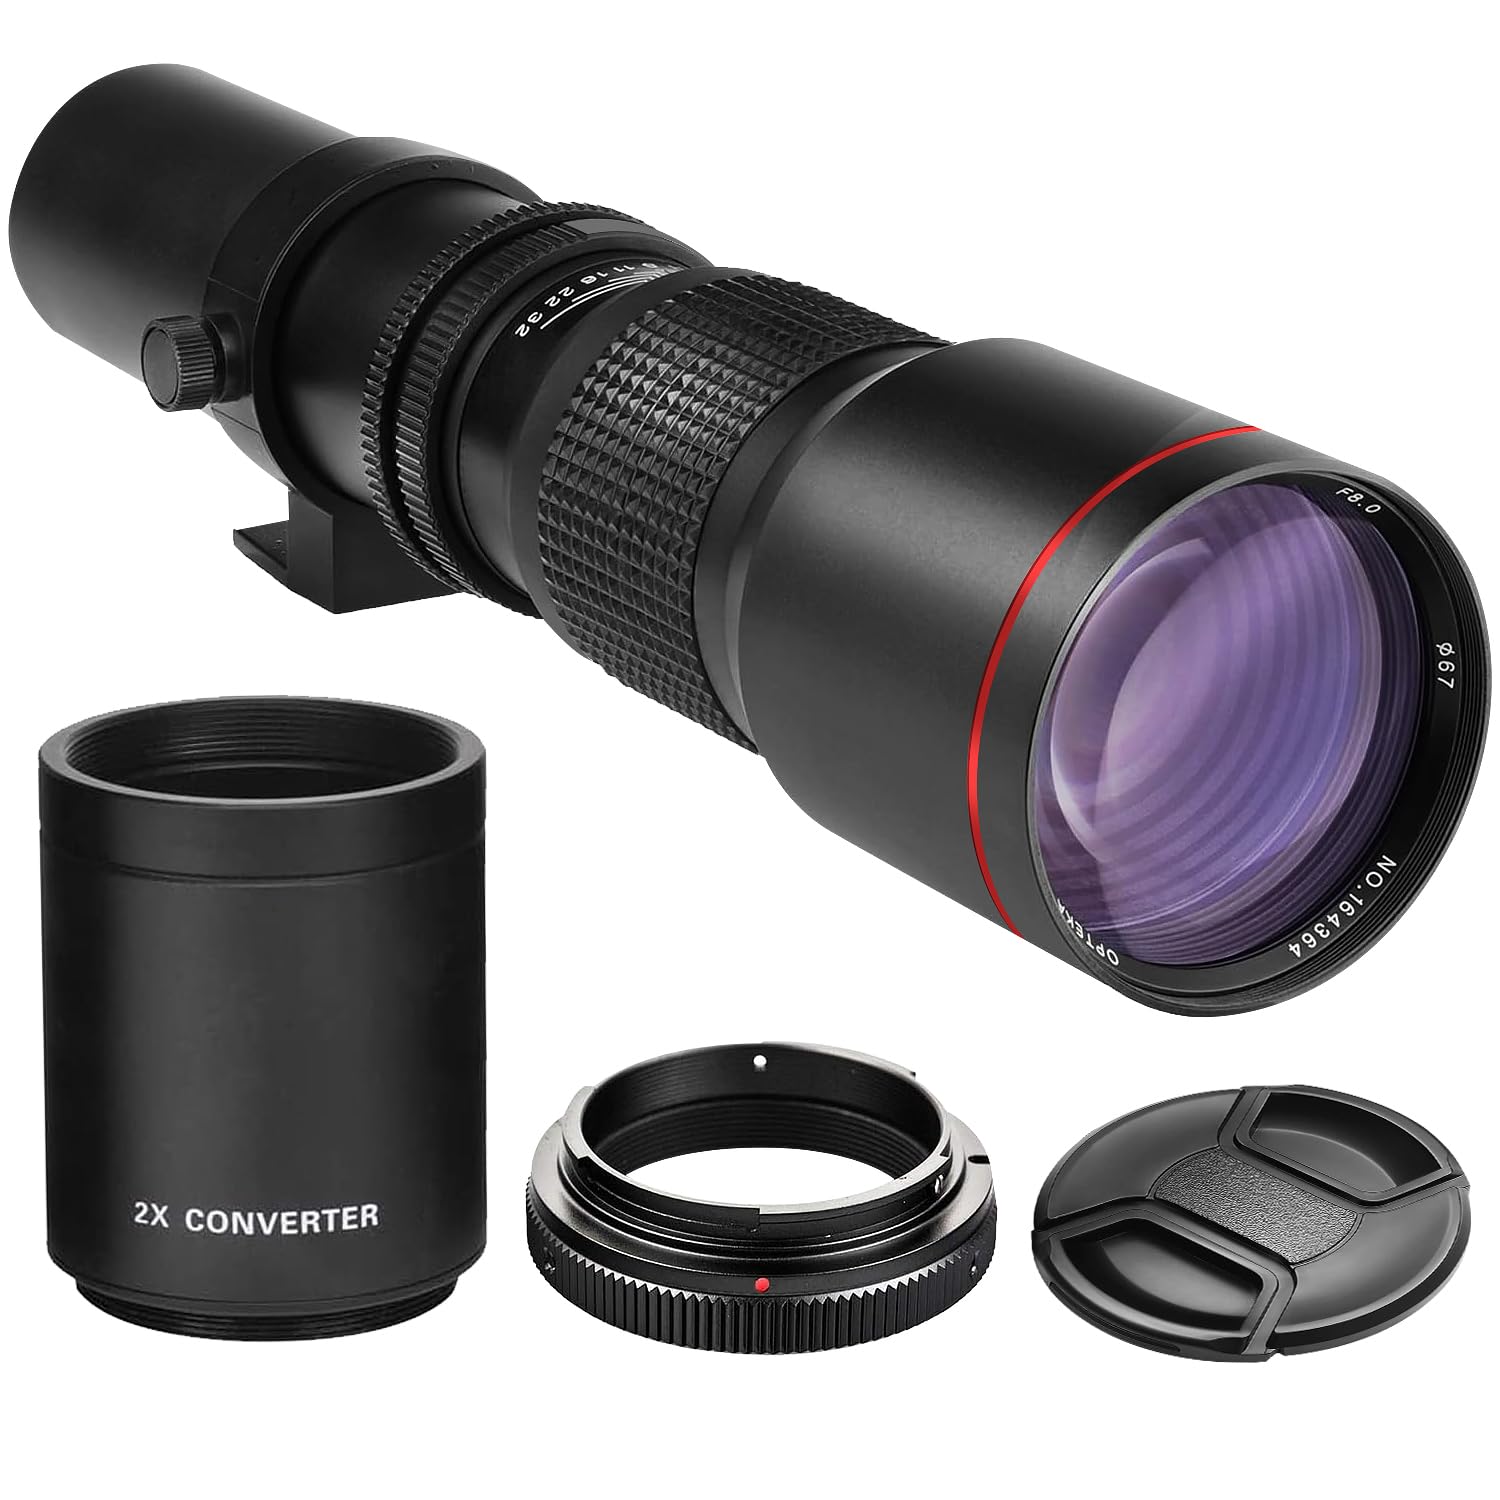 High-Power 500mm/1000mm f/8 Manual Telephoto Lens for Canon Digital EOS Rebel T1i T2i T3 T3i T4i T5 T5i T6i T6s SL1 EOS60D EOS70D 50D 40D 30D EOS 5D EOS1D EOS5D III EOS 5Ds EOS 6D EOS 7D EOS 7D Mark II Digital SLR Cameras - BLACK